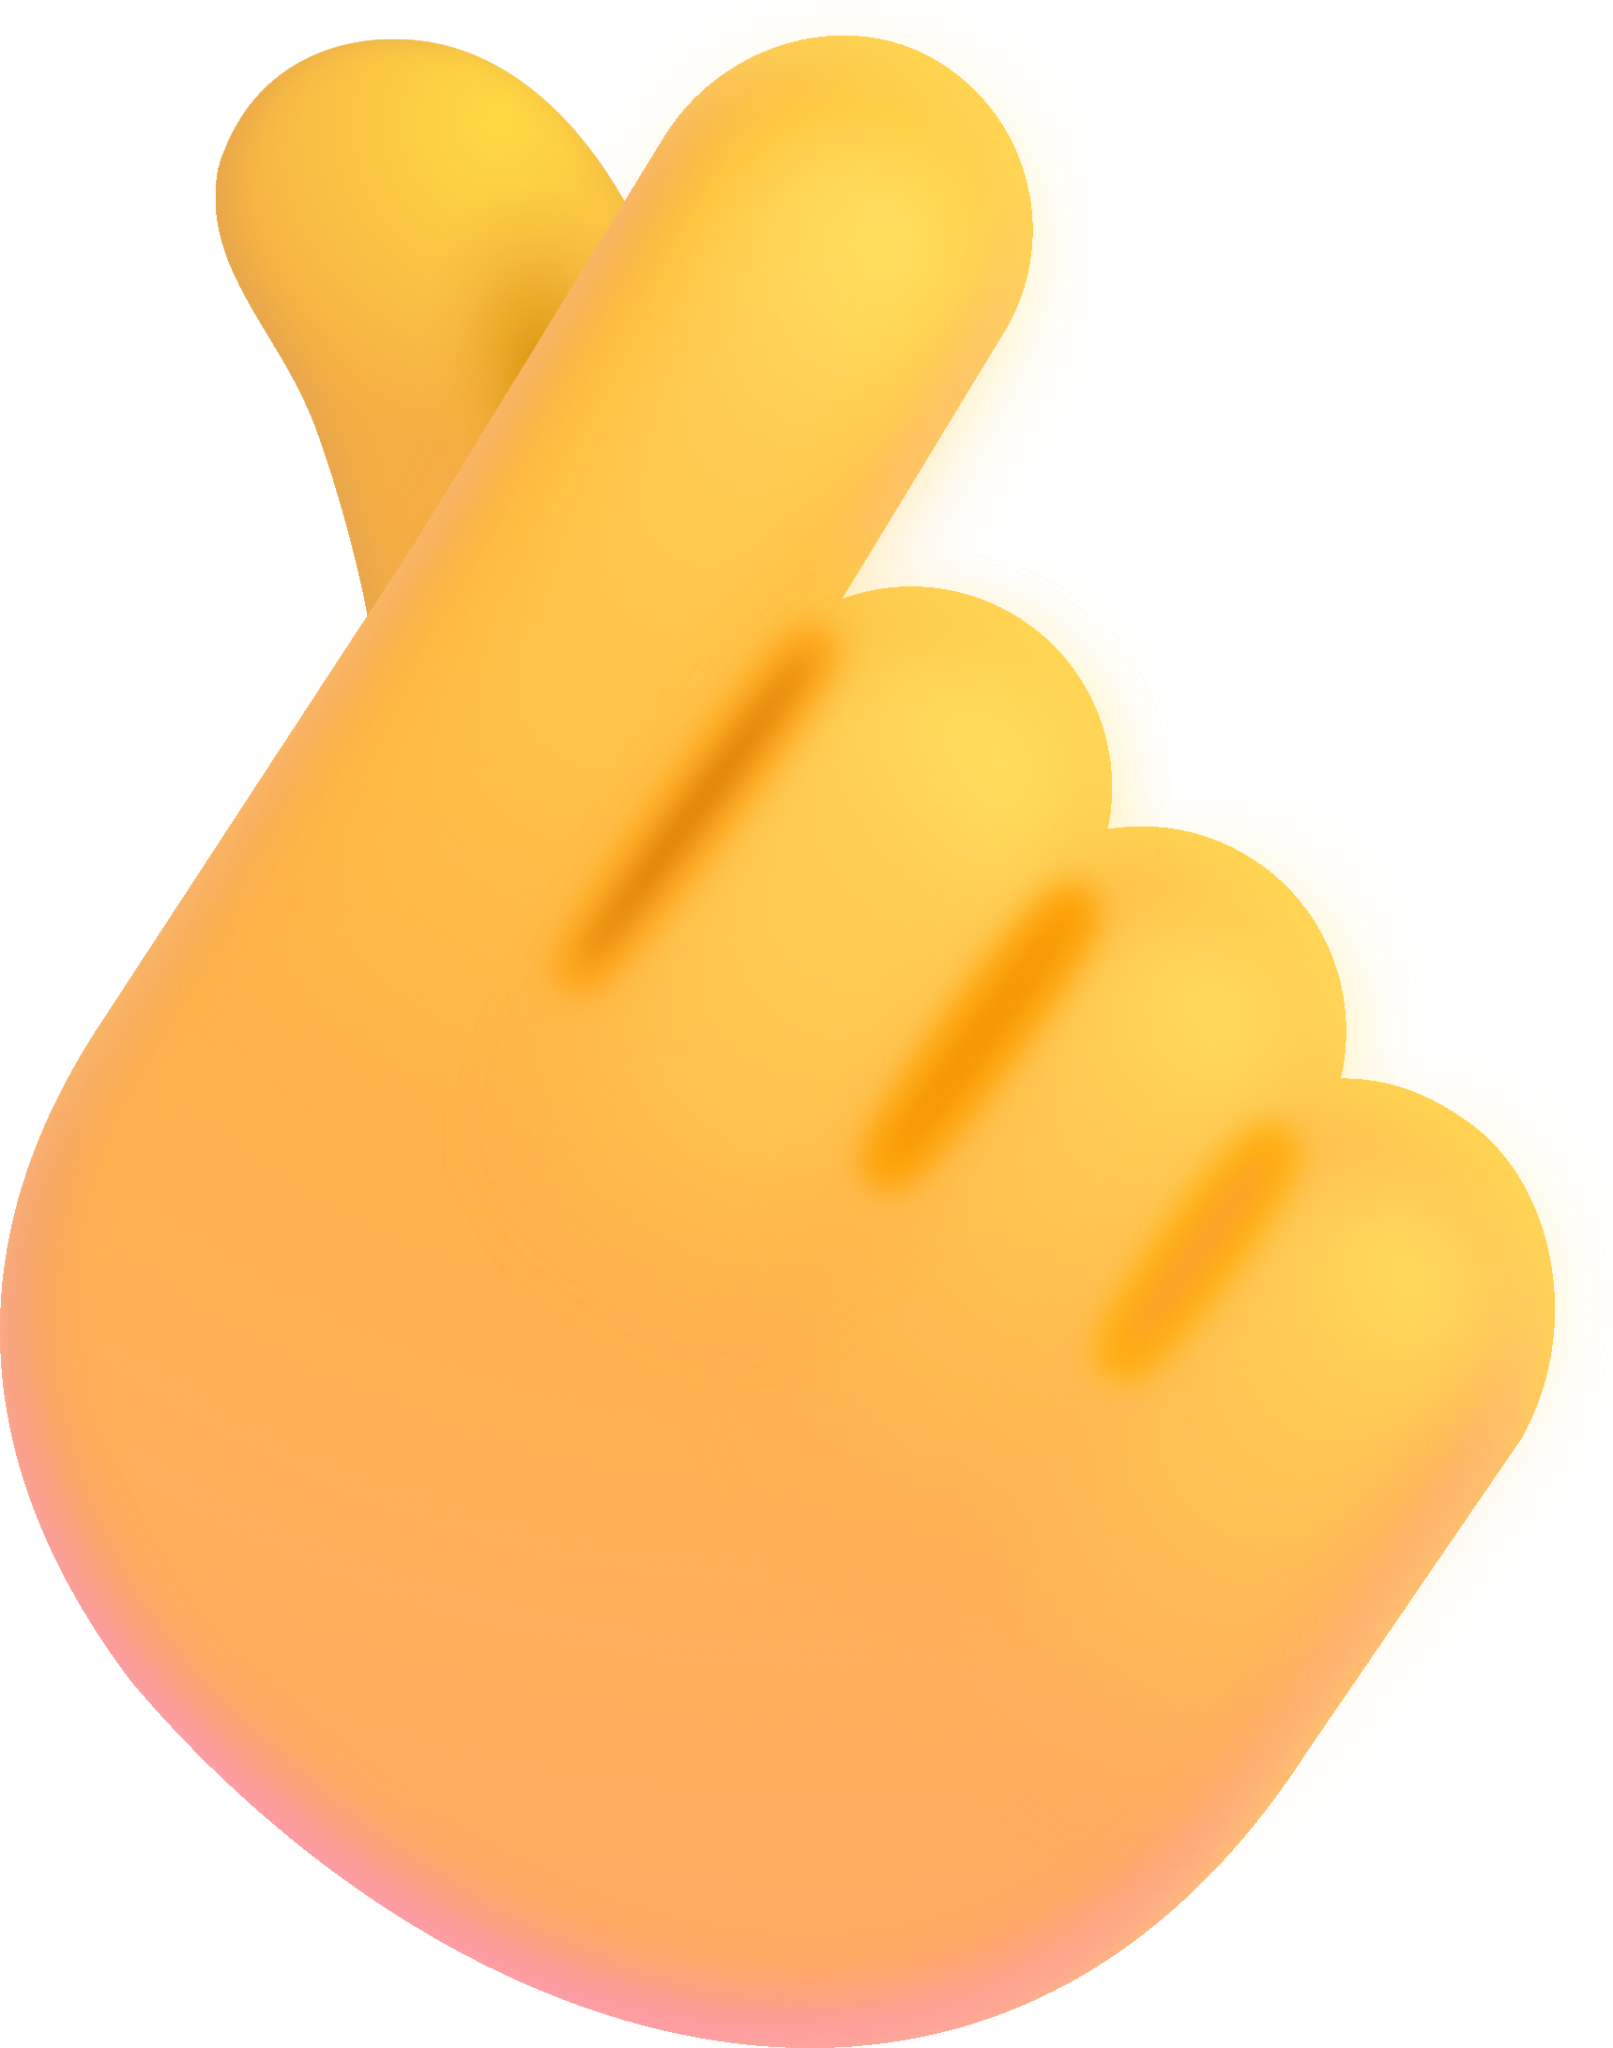 hand with index finger and thumb crossed default emoji